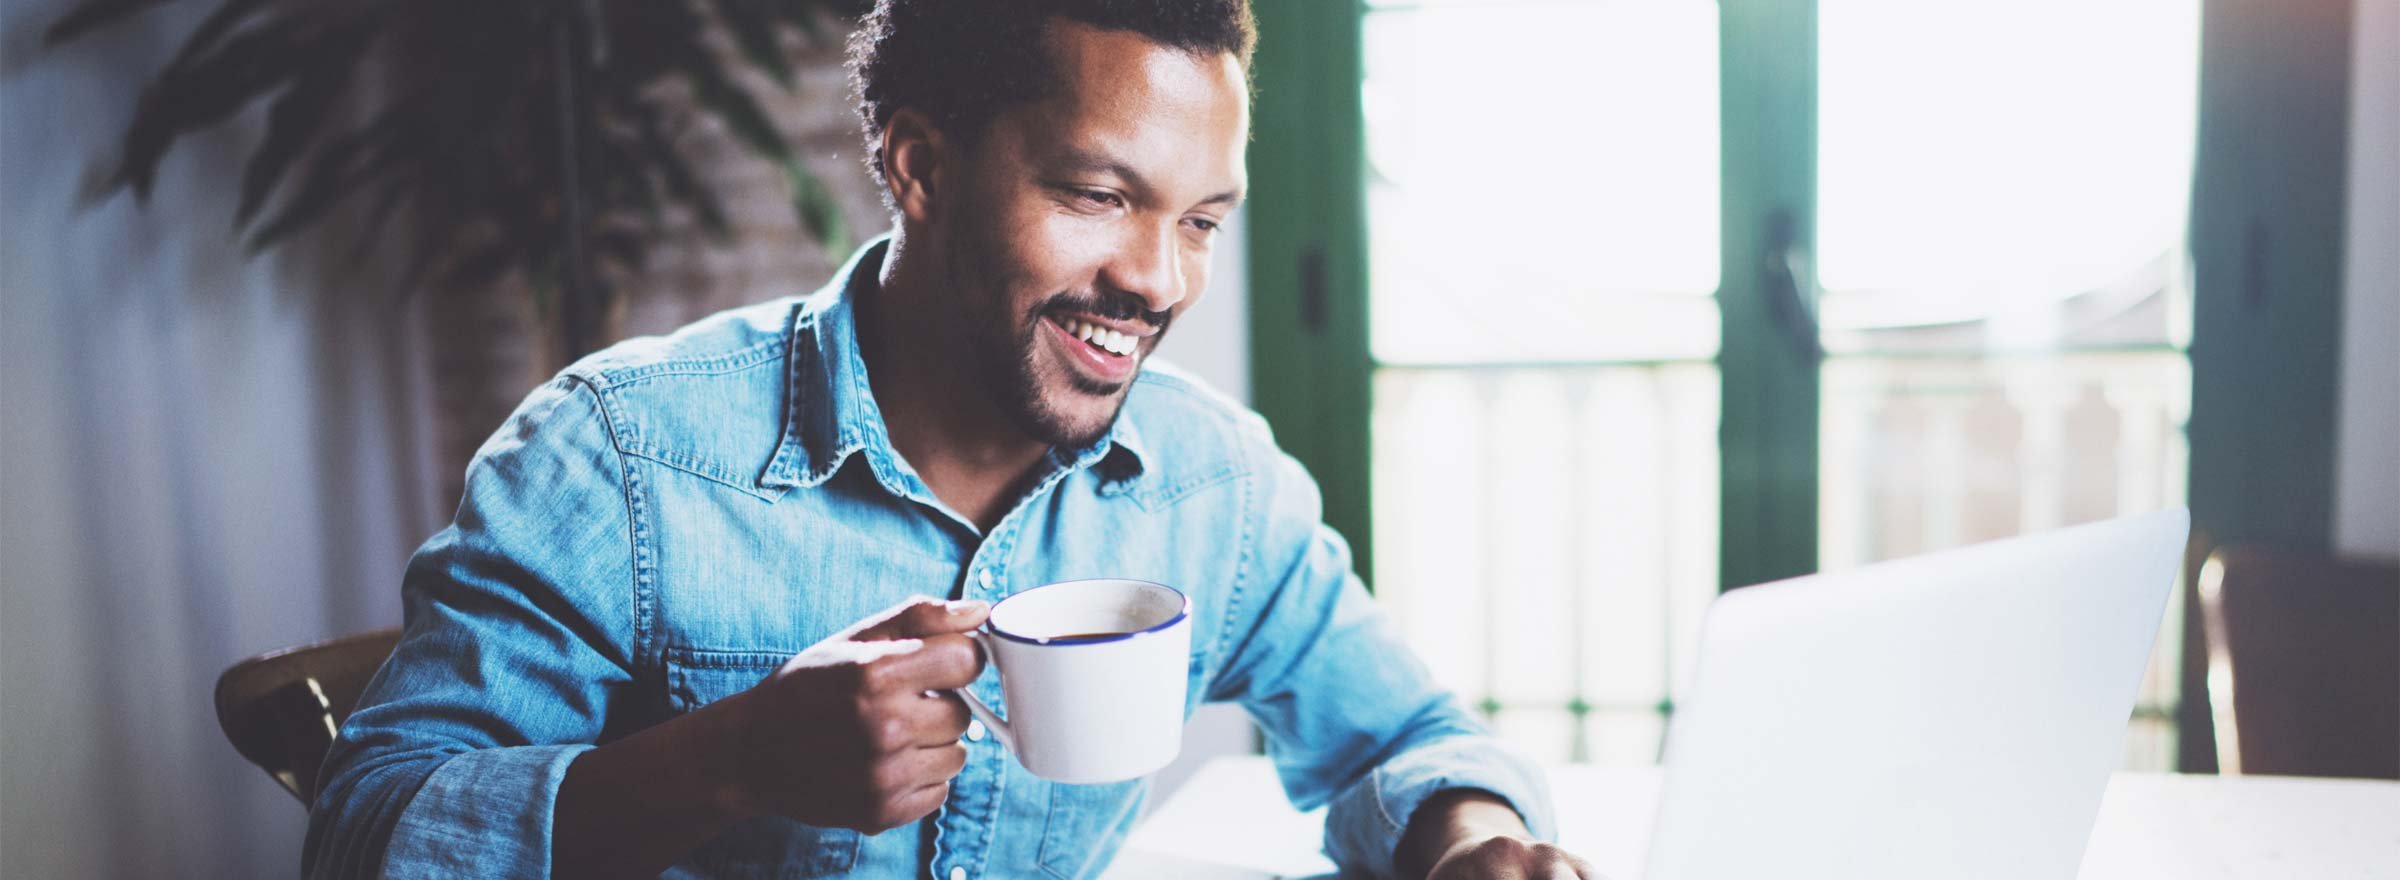 man drinking coffee and smiling at a computer